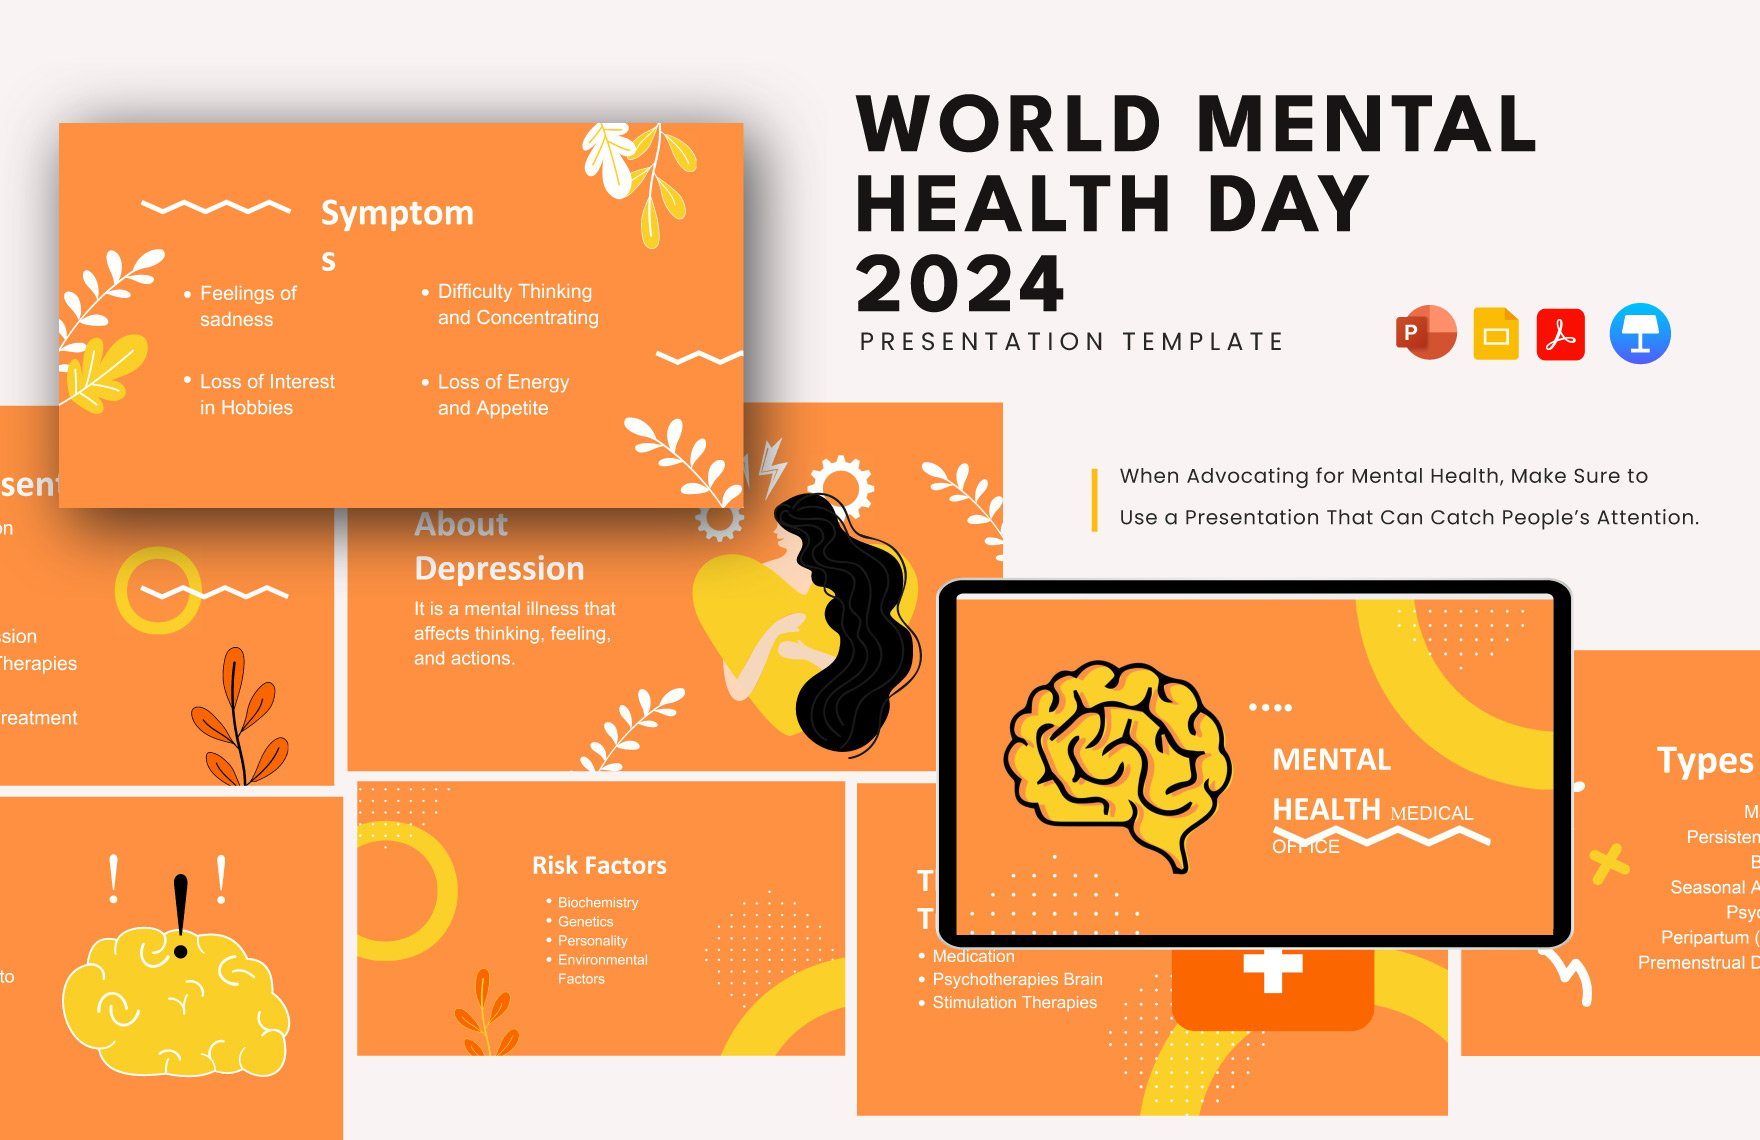 World Mental Health Day 2024 Template